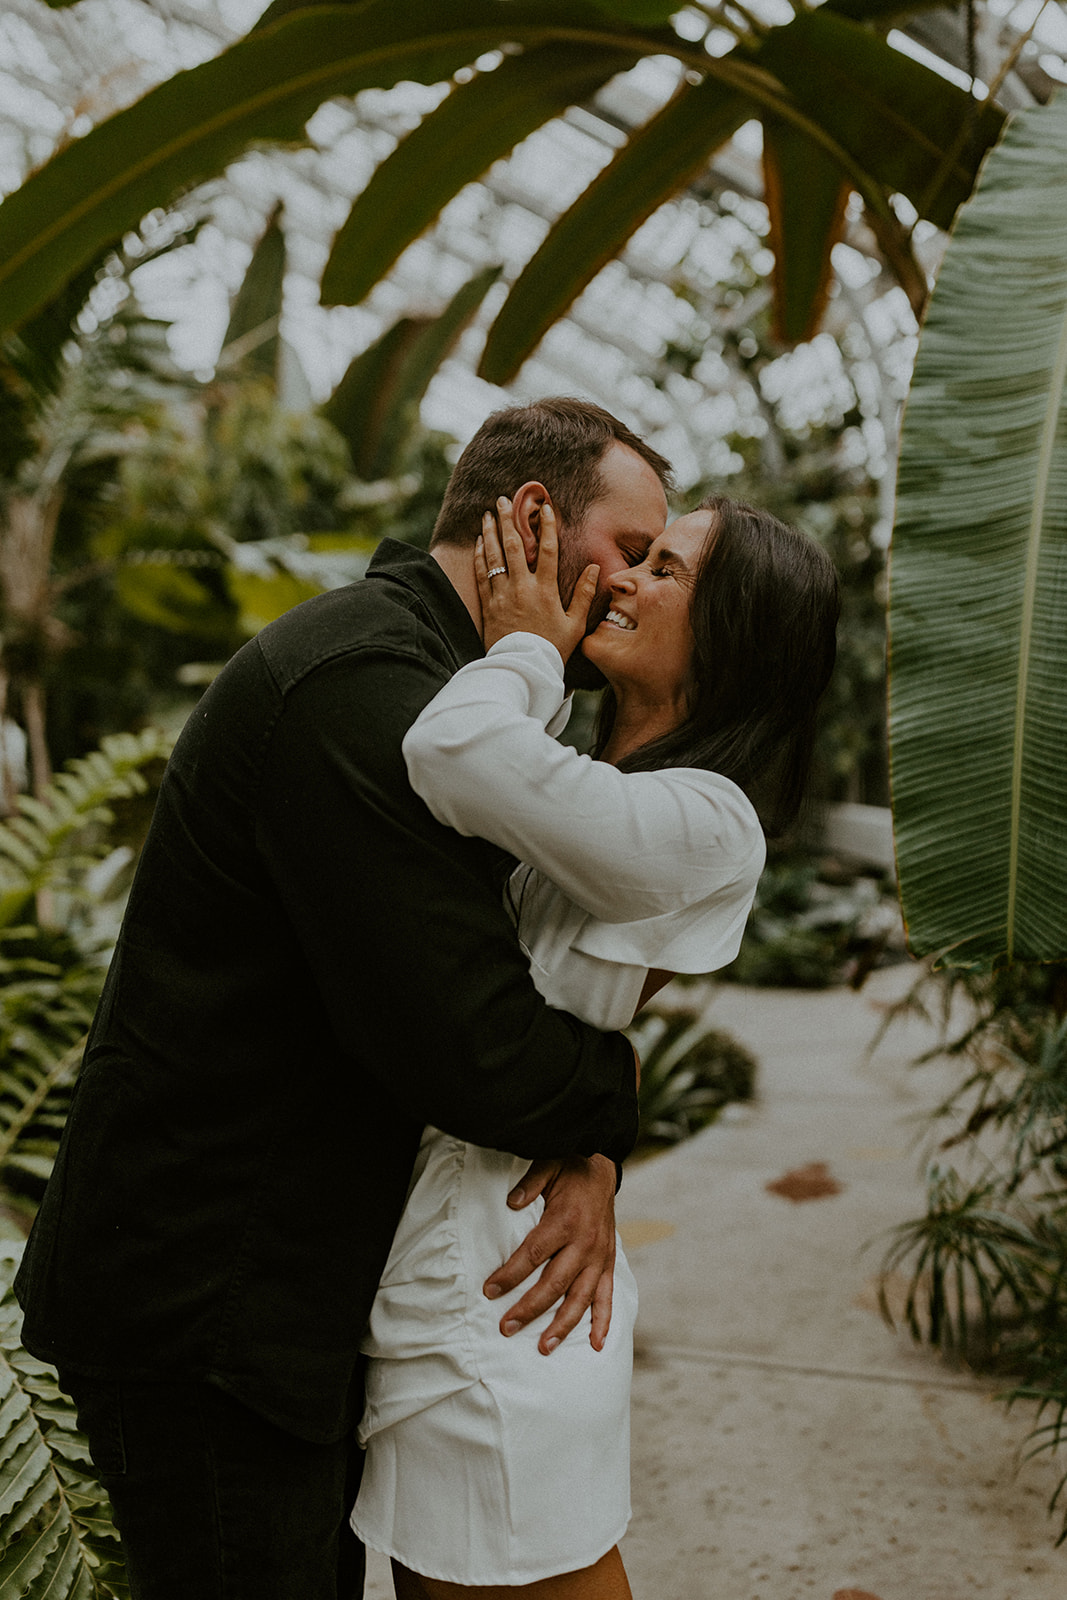 7 Engagement Photo Tips For The Perfect Engagement Session: Couple wrapping their arms around each other and smiling at a garden.